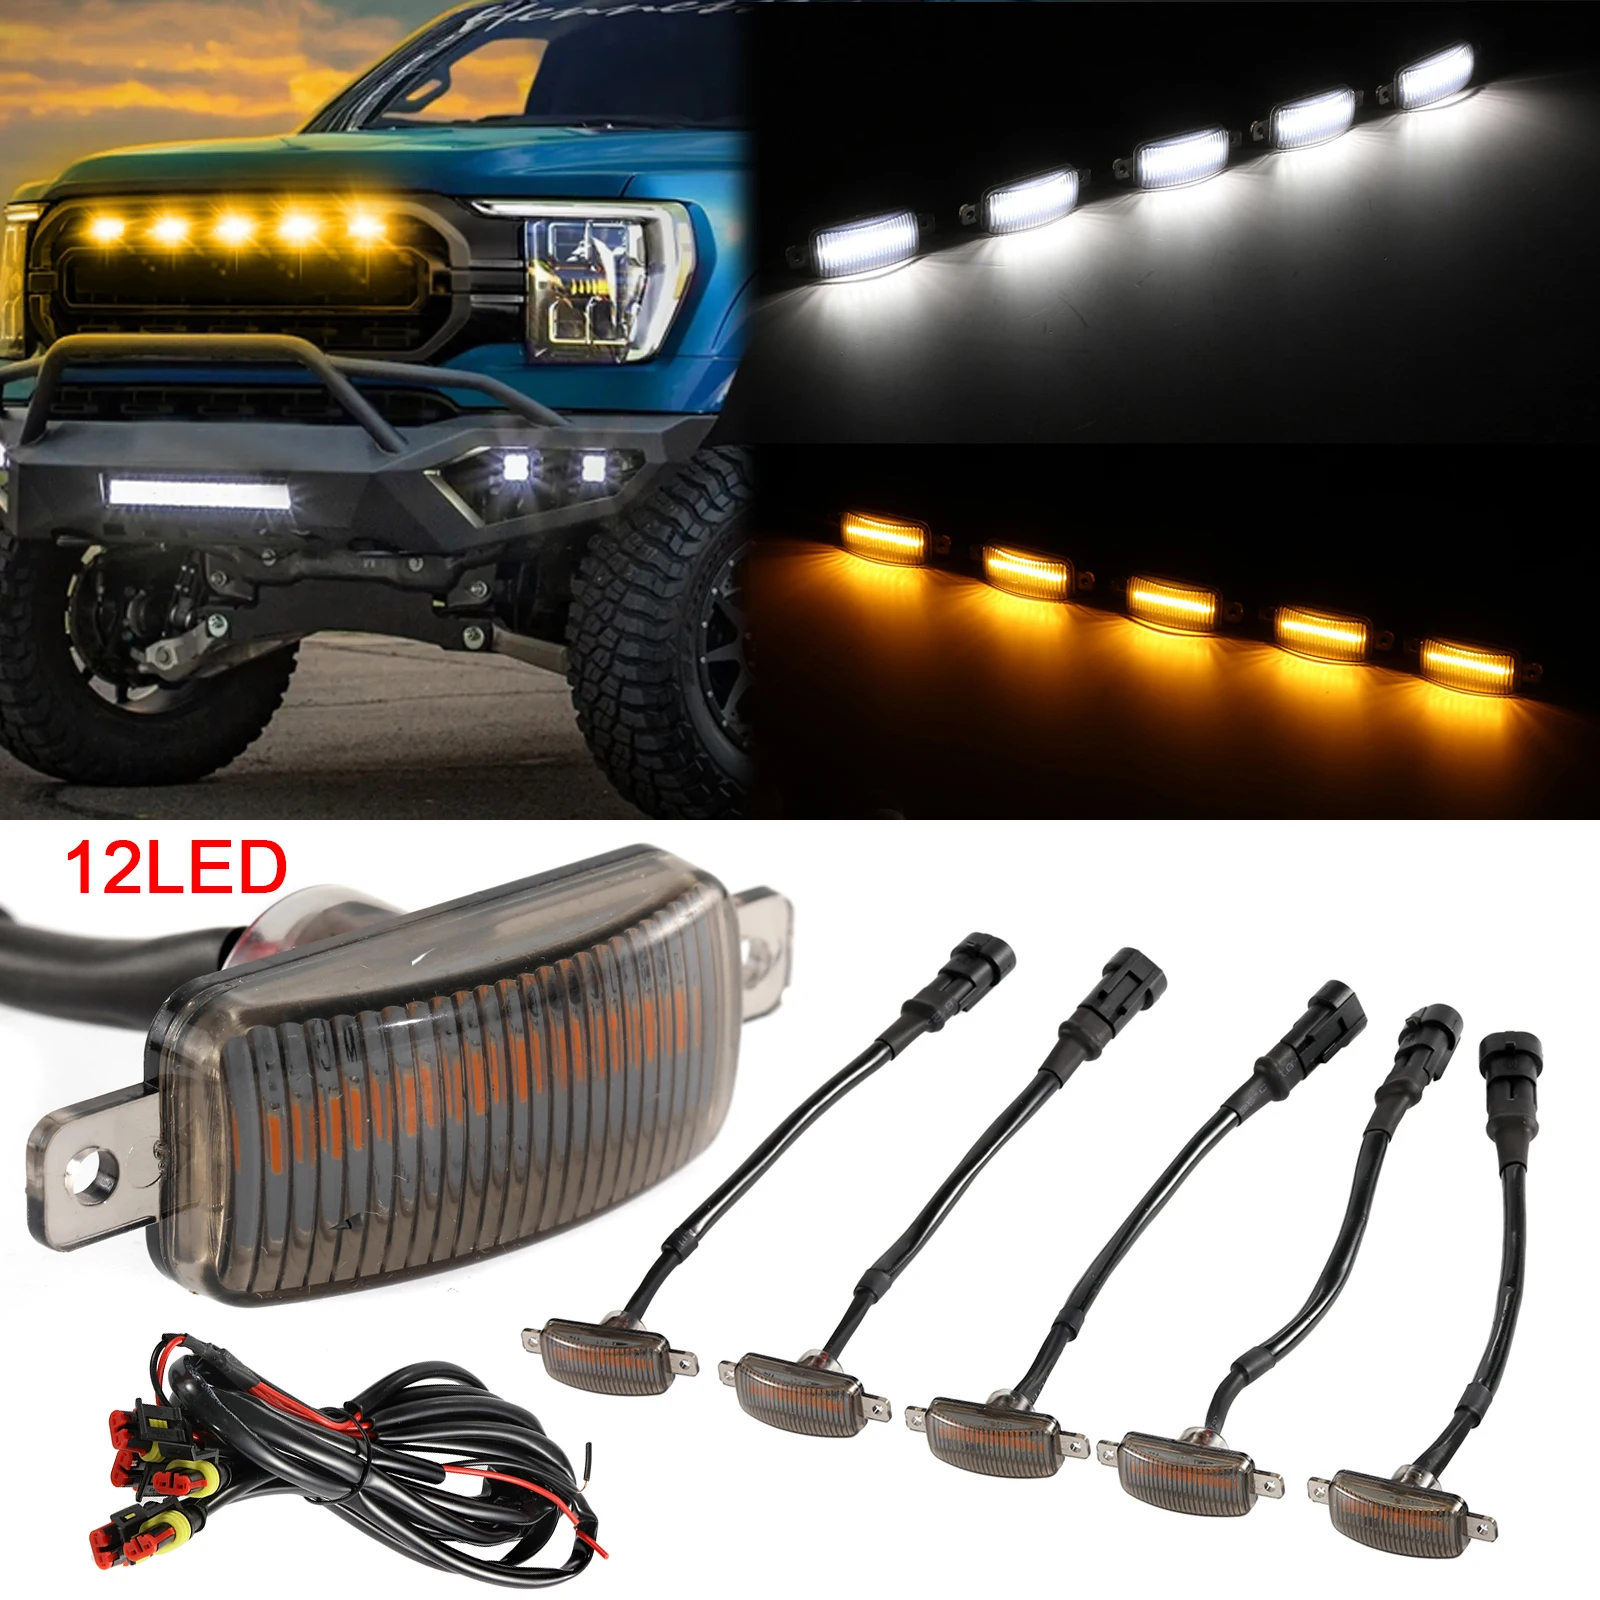 

Universal Car LED Grille Light Smoked Amber White 12LED Grill Light Lighting Eagle Eye Lamp for Off Road Trunk SUV Ford Toyota